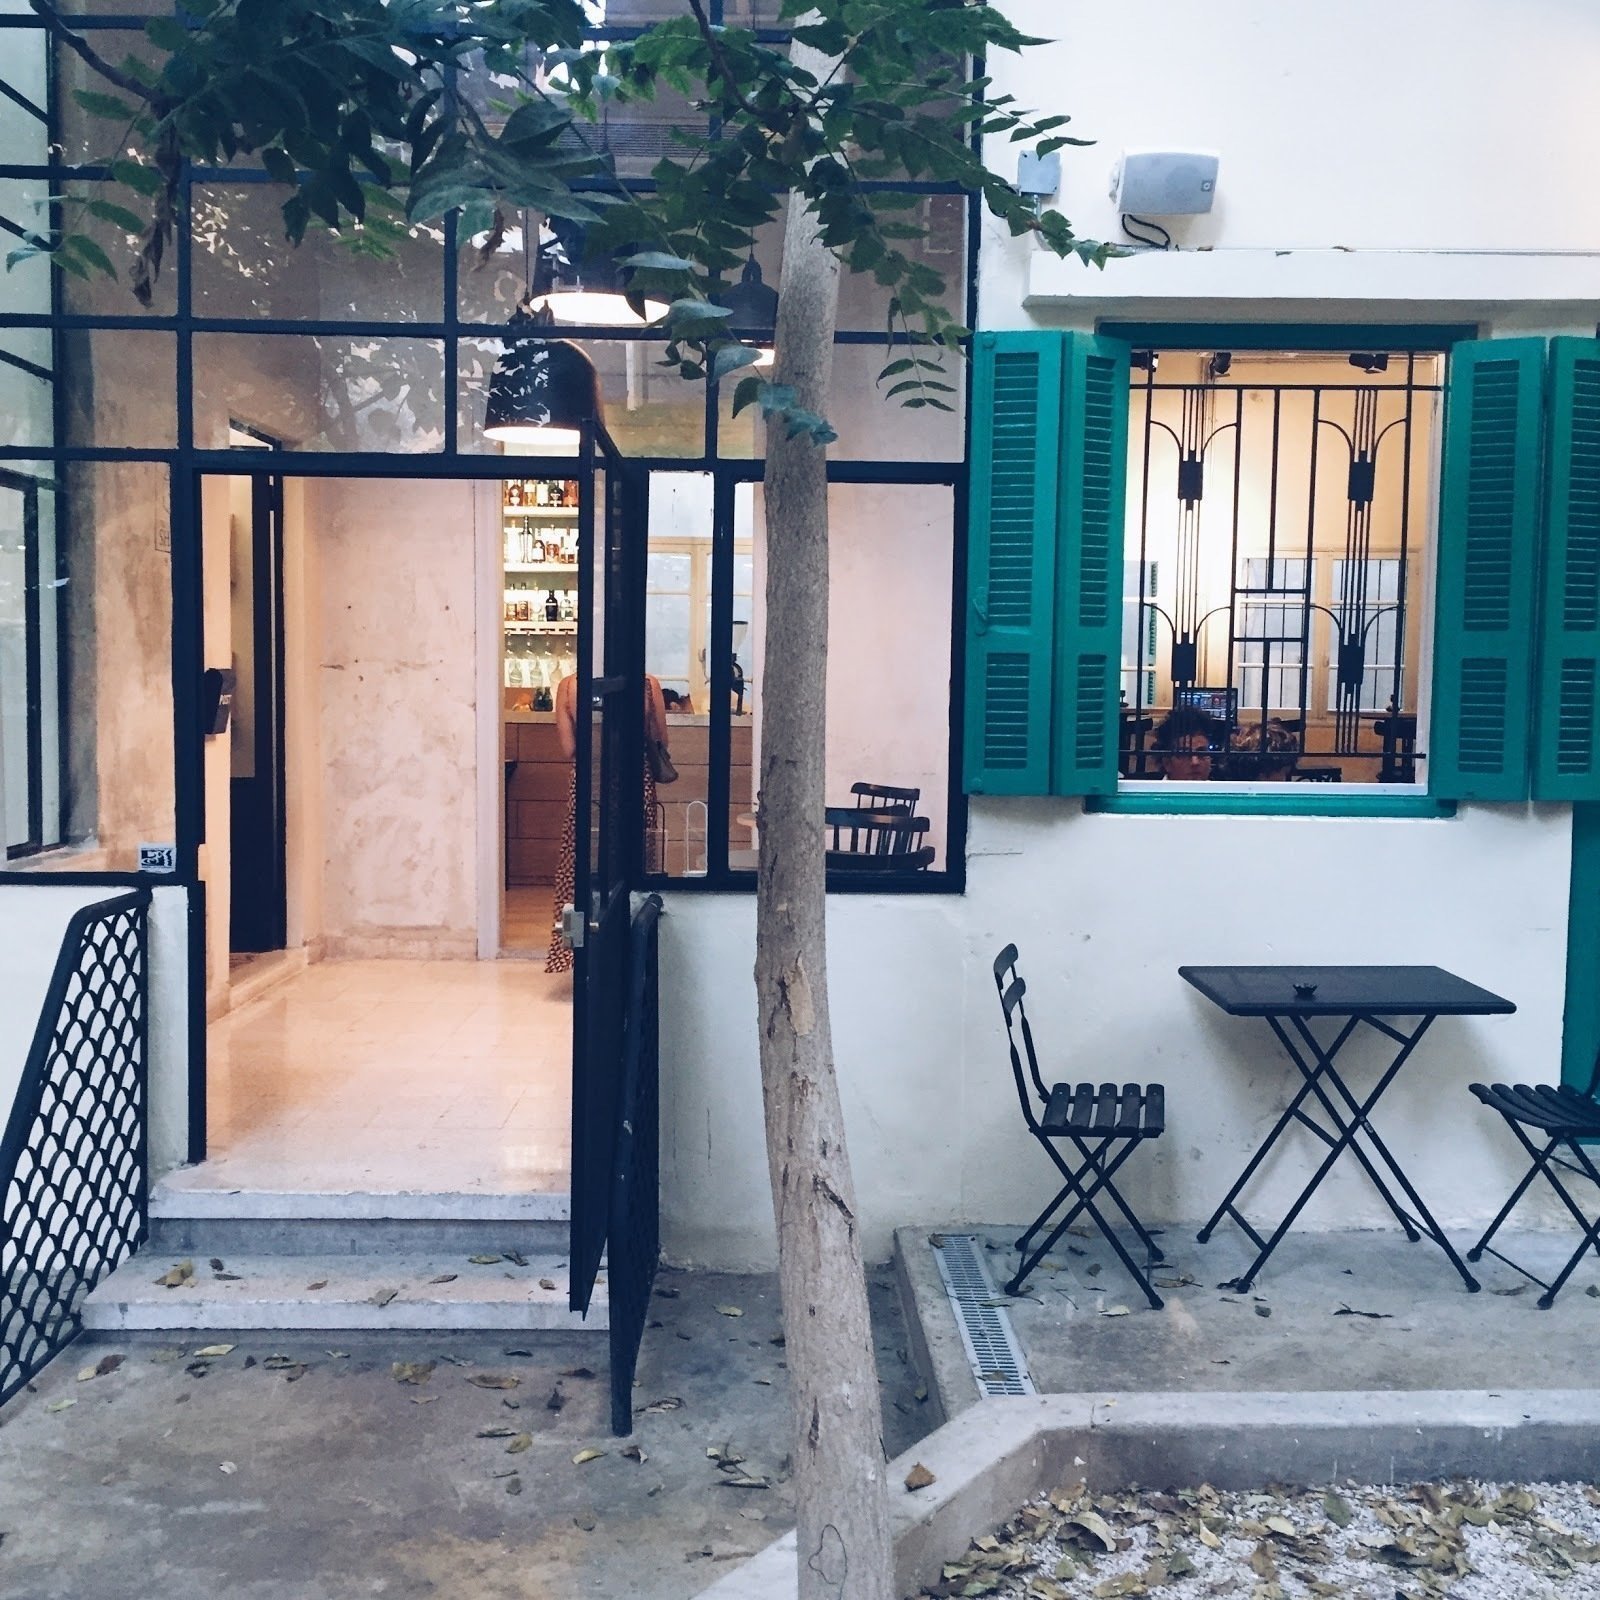 <span class="translation_missing" title="translation missing: en.meta.location_title, location_name: Kalei Coffee Co., city: Beirut">Location Title</span>